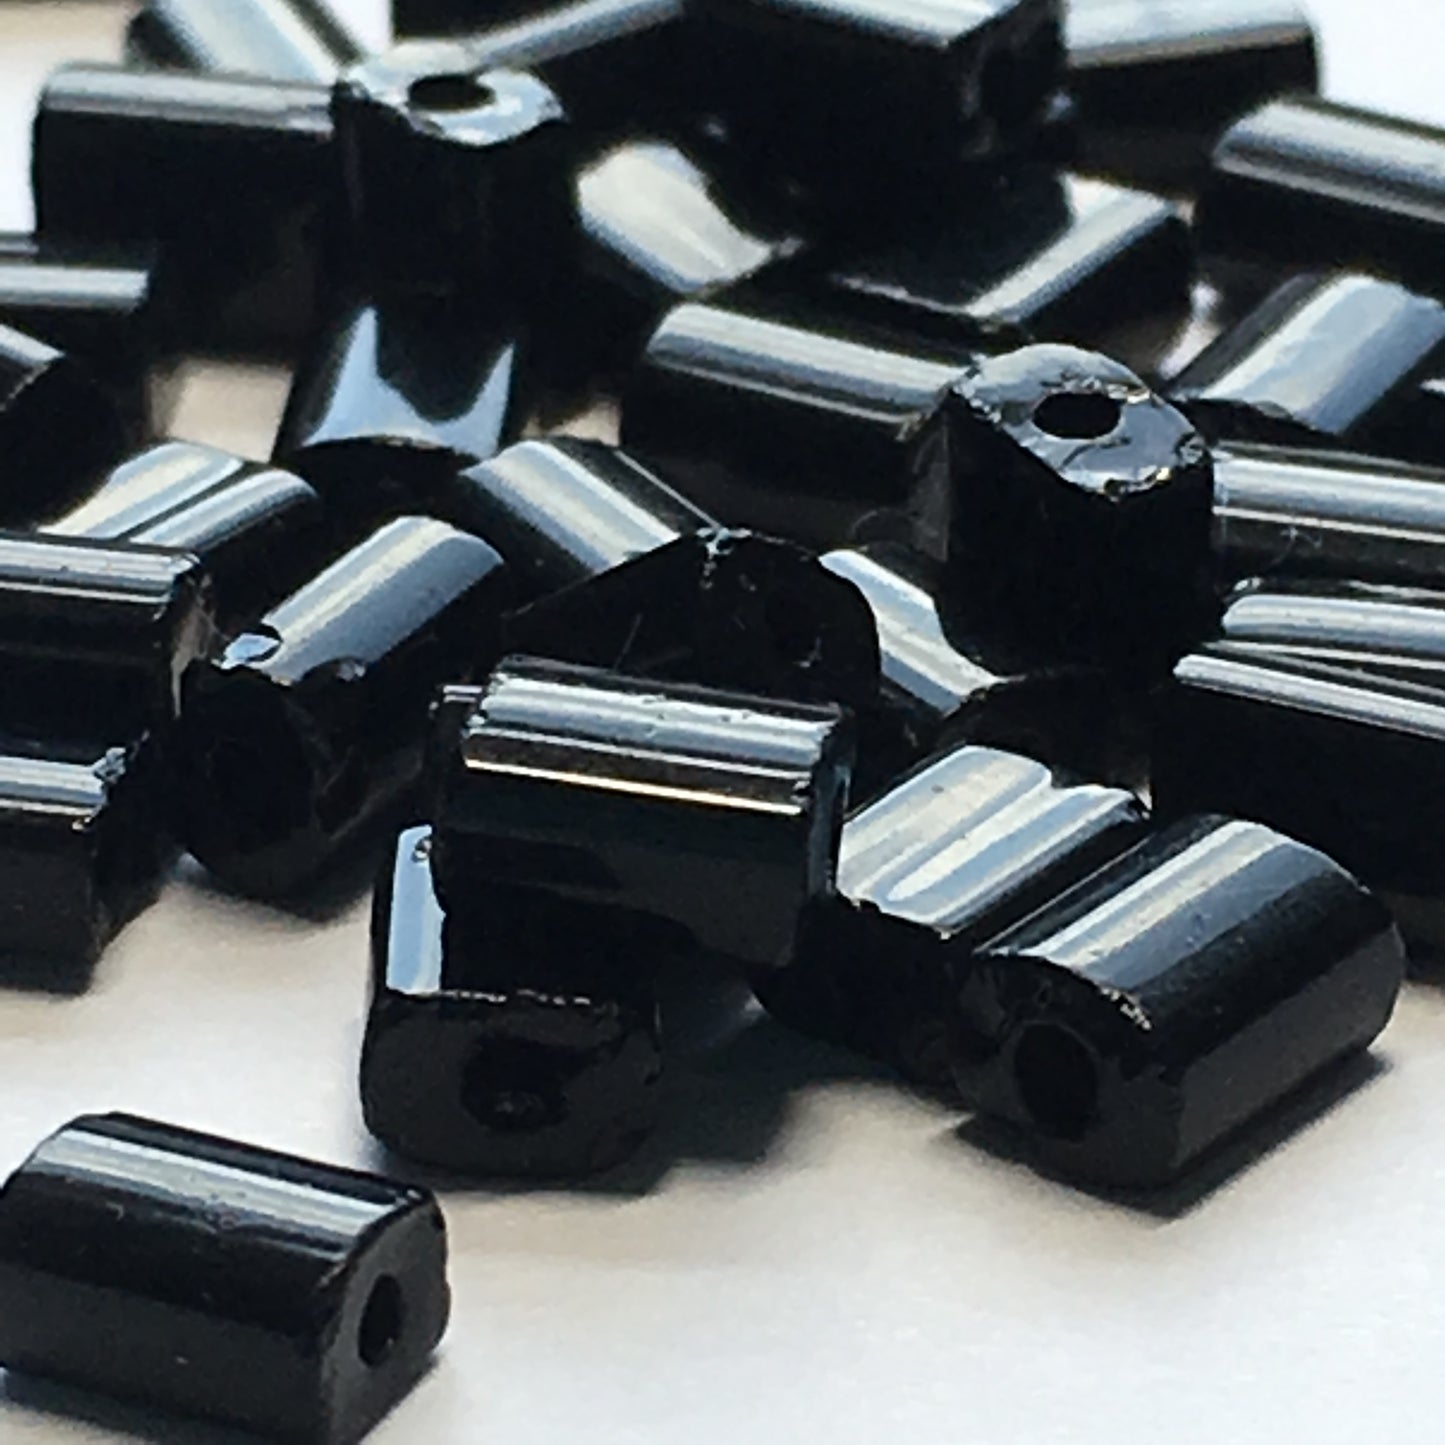 Opaque Black Glass Flat Rectangle Beads, 5 x 4 x 3 mm Average Size - 25 or 50 Beads